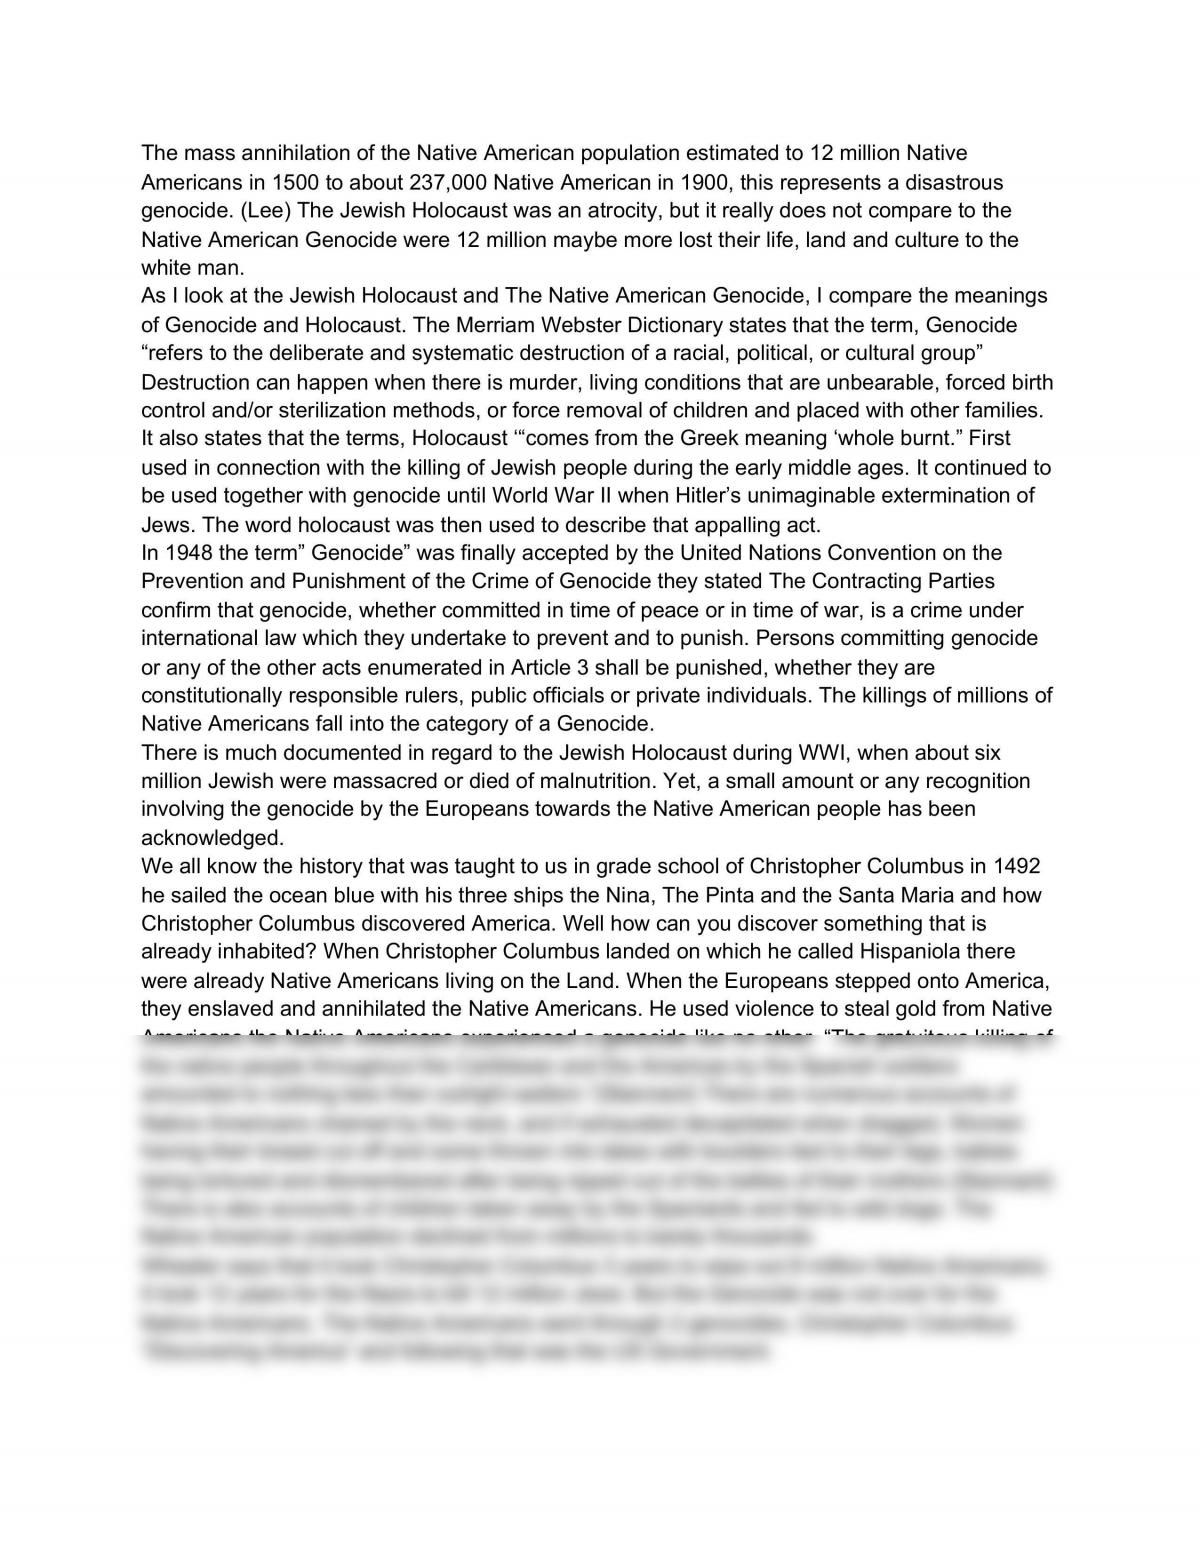 Erasing of Native Americans - Page 1